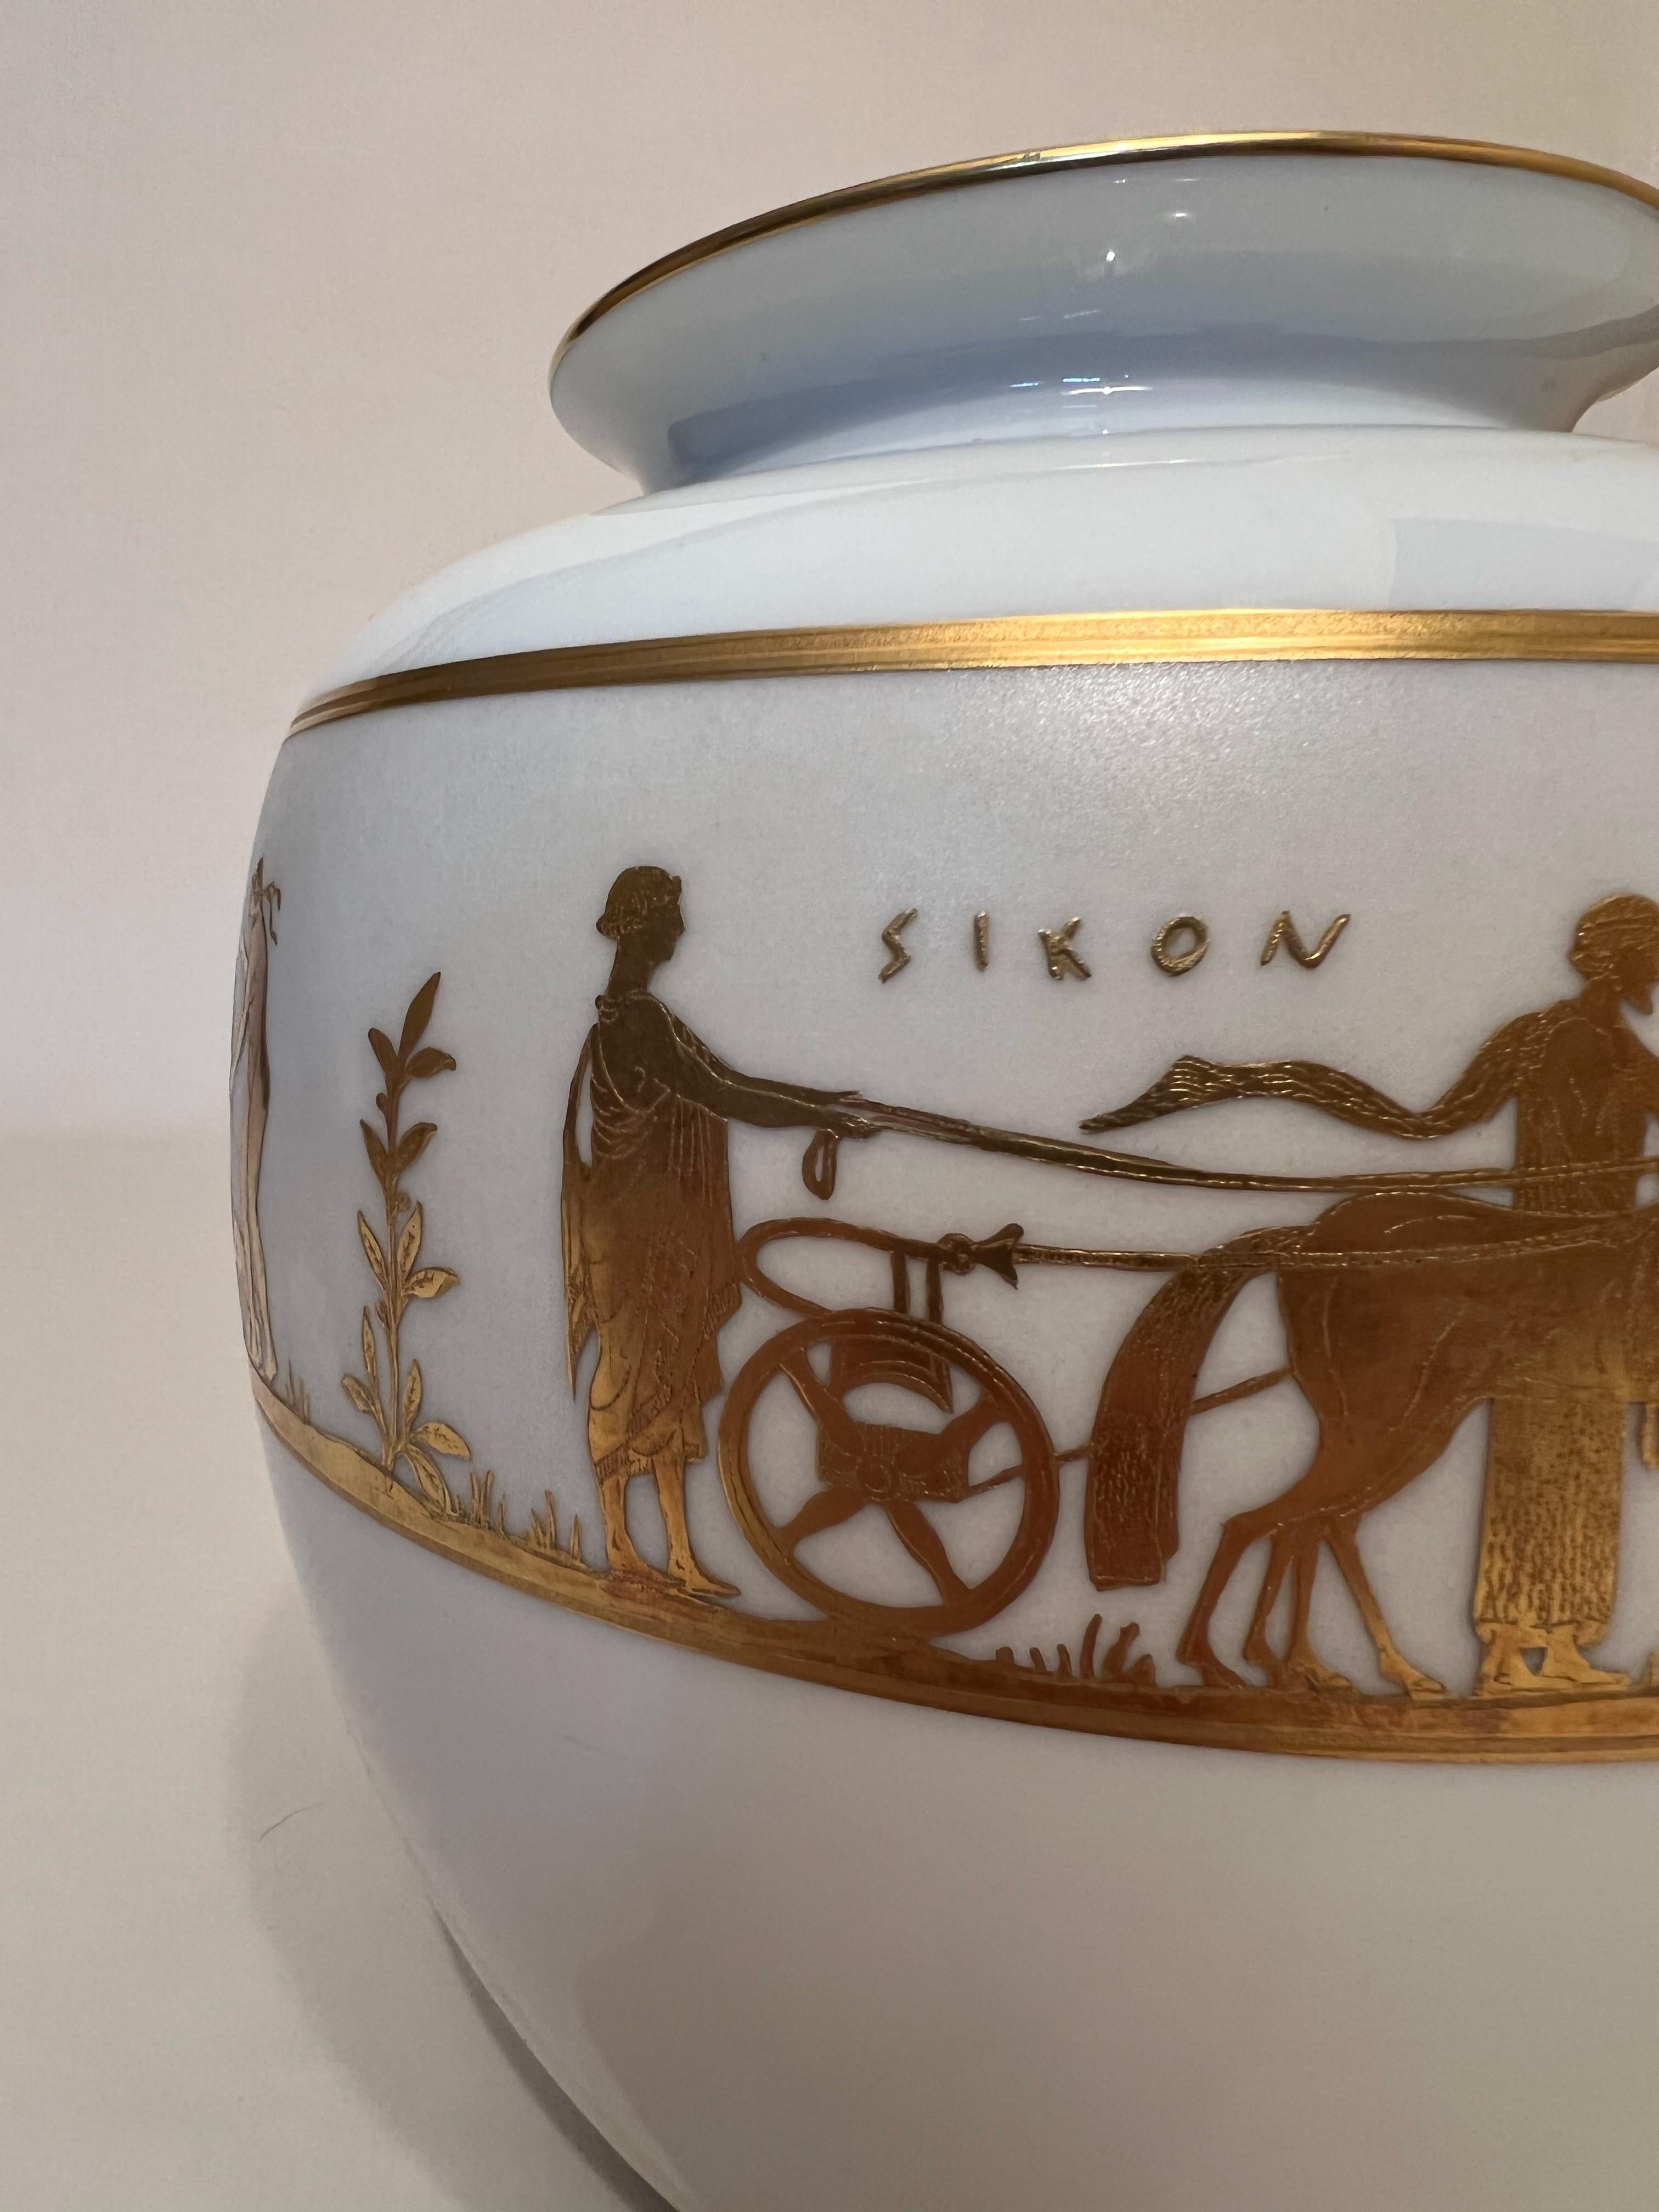 Superb white and gold ceramic vase with screen-printing depicting mythological scenes and the inscription SIKON, suggesting that the scenes speak of the harvest, typical in Greece, of figs. 
Famous for its silverware, the Florentine 'Finzi'